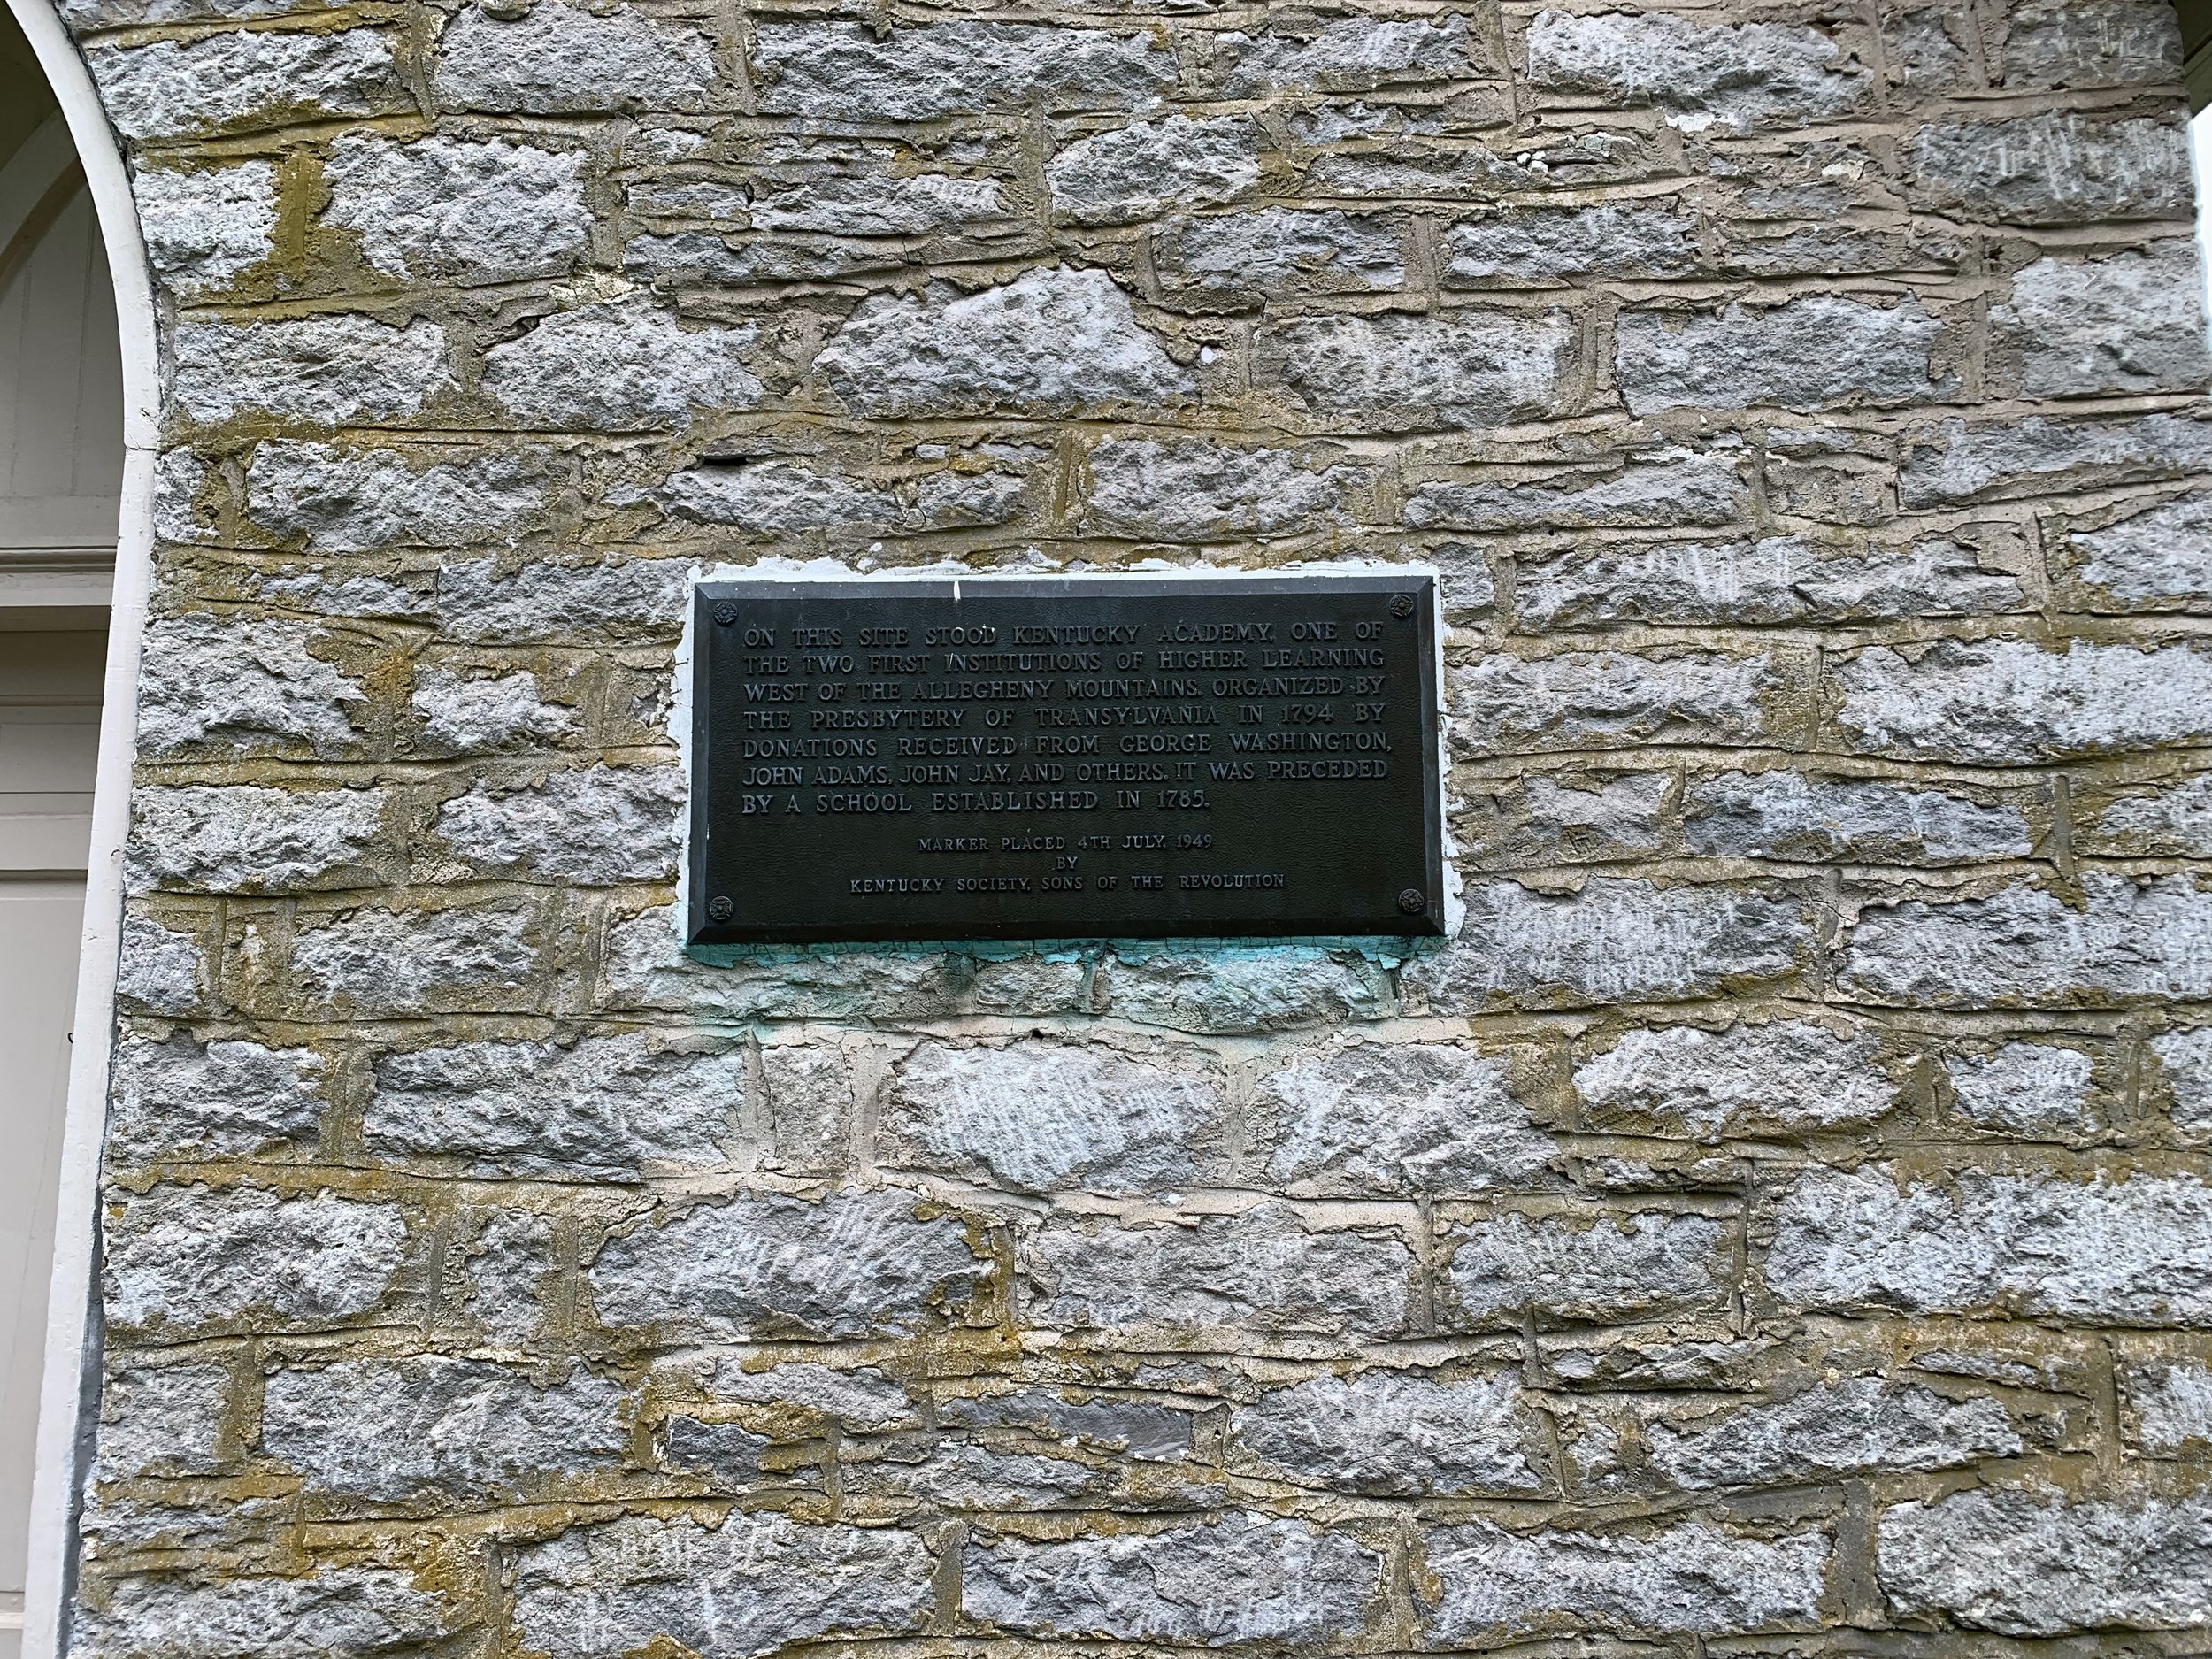 Plaque Honoring a Former School on the Site